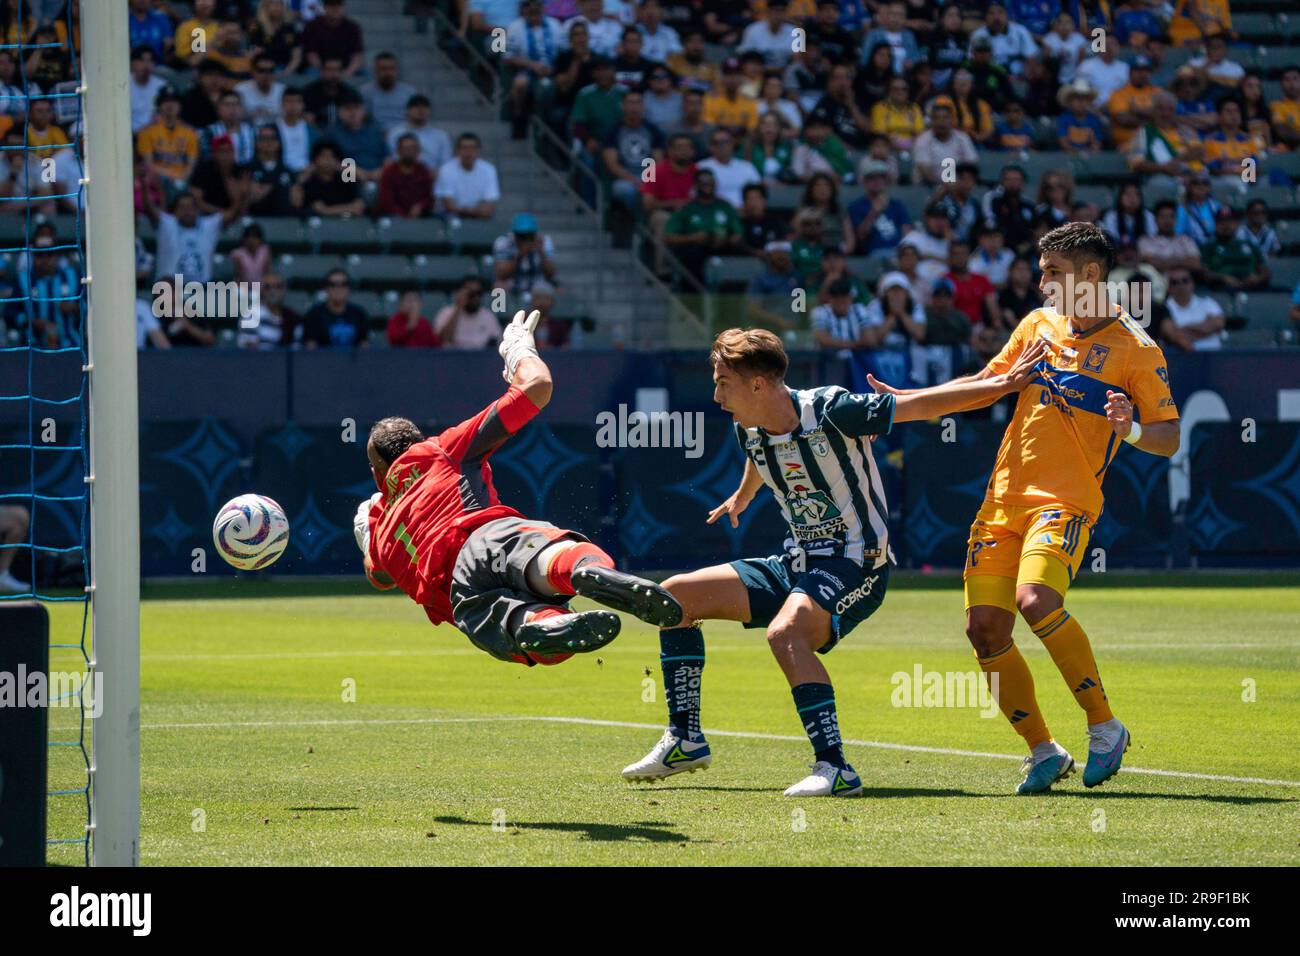 UANL Tigres goalkeeper Nahuel Guzmán (1) dives for a shot that goes wide during a Campeón de Campeones Liga MX match against Pachuca, Sunday, June 25, Stock Photo